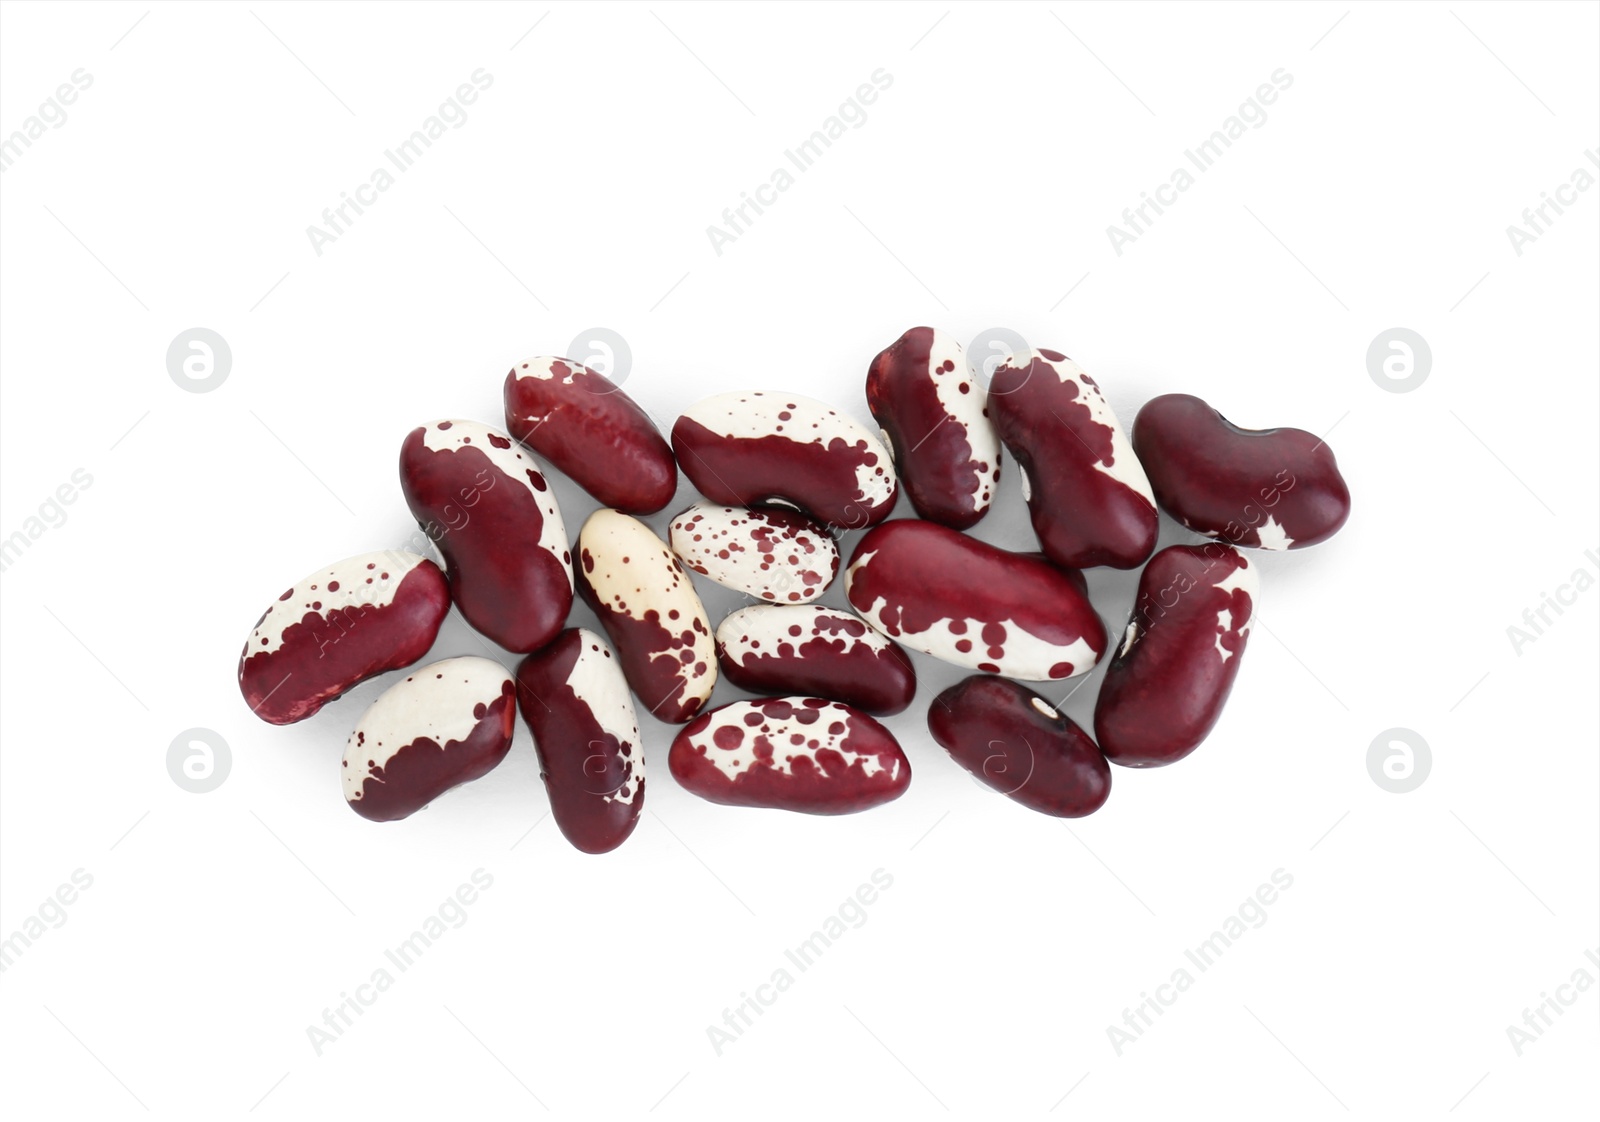 Photo of Dry kidney beans on white background, top view